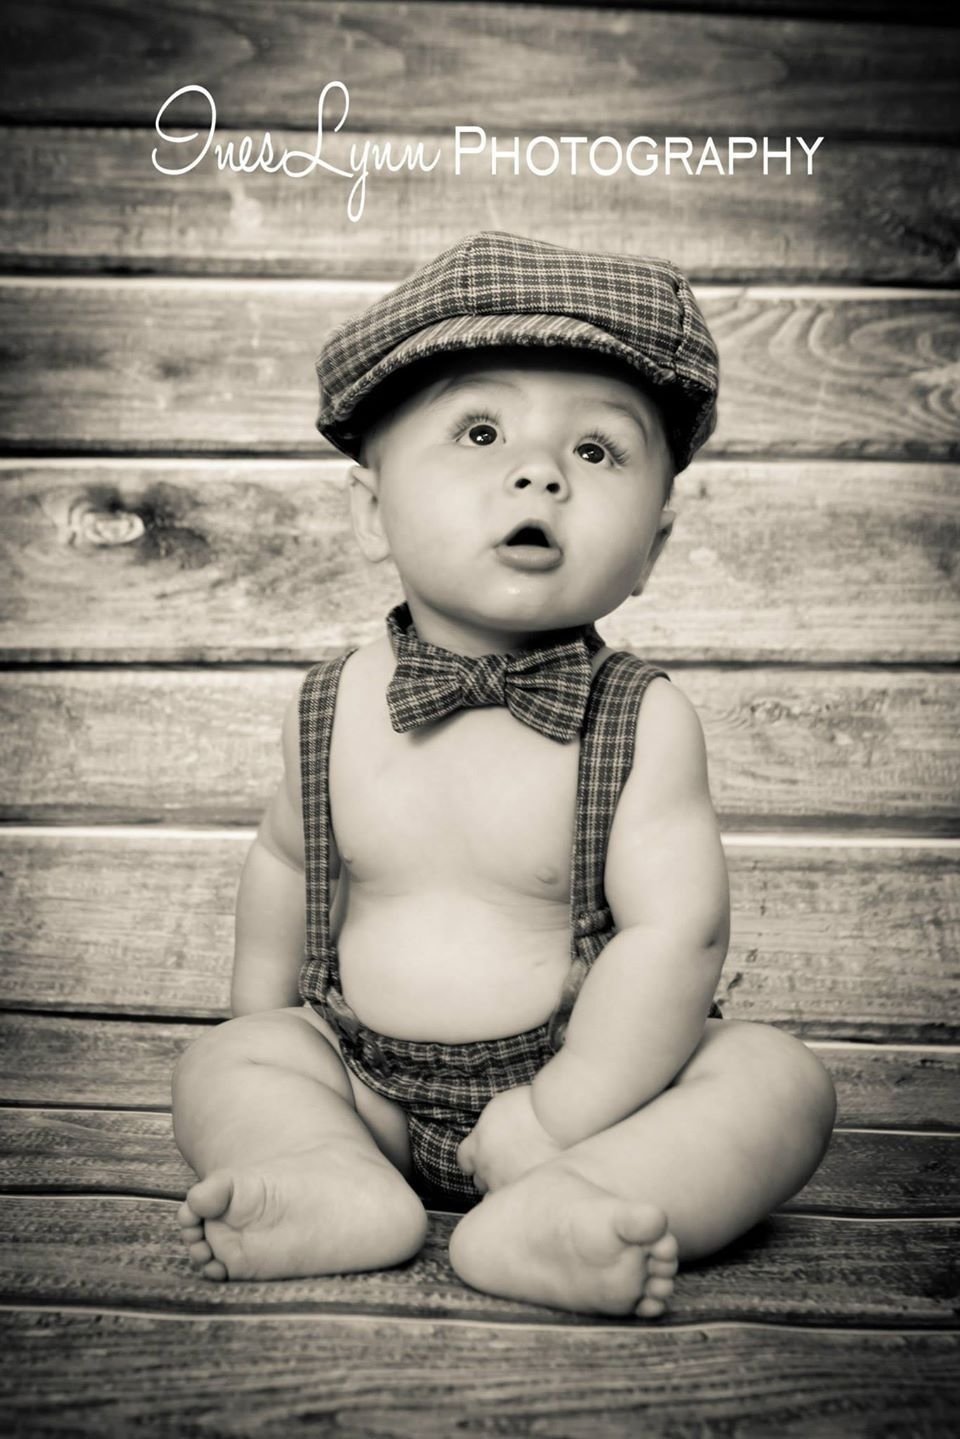 10 Great 6 Month Old Picture Ideas 6 month old baby photography ideas baby boy photo ideas vintage 10 2022